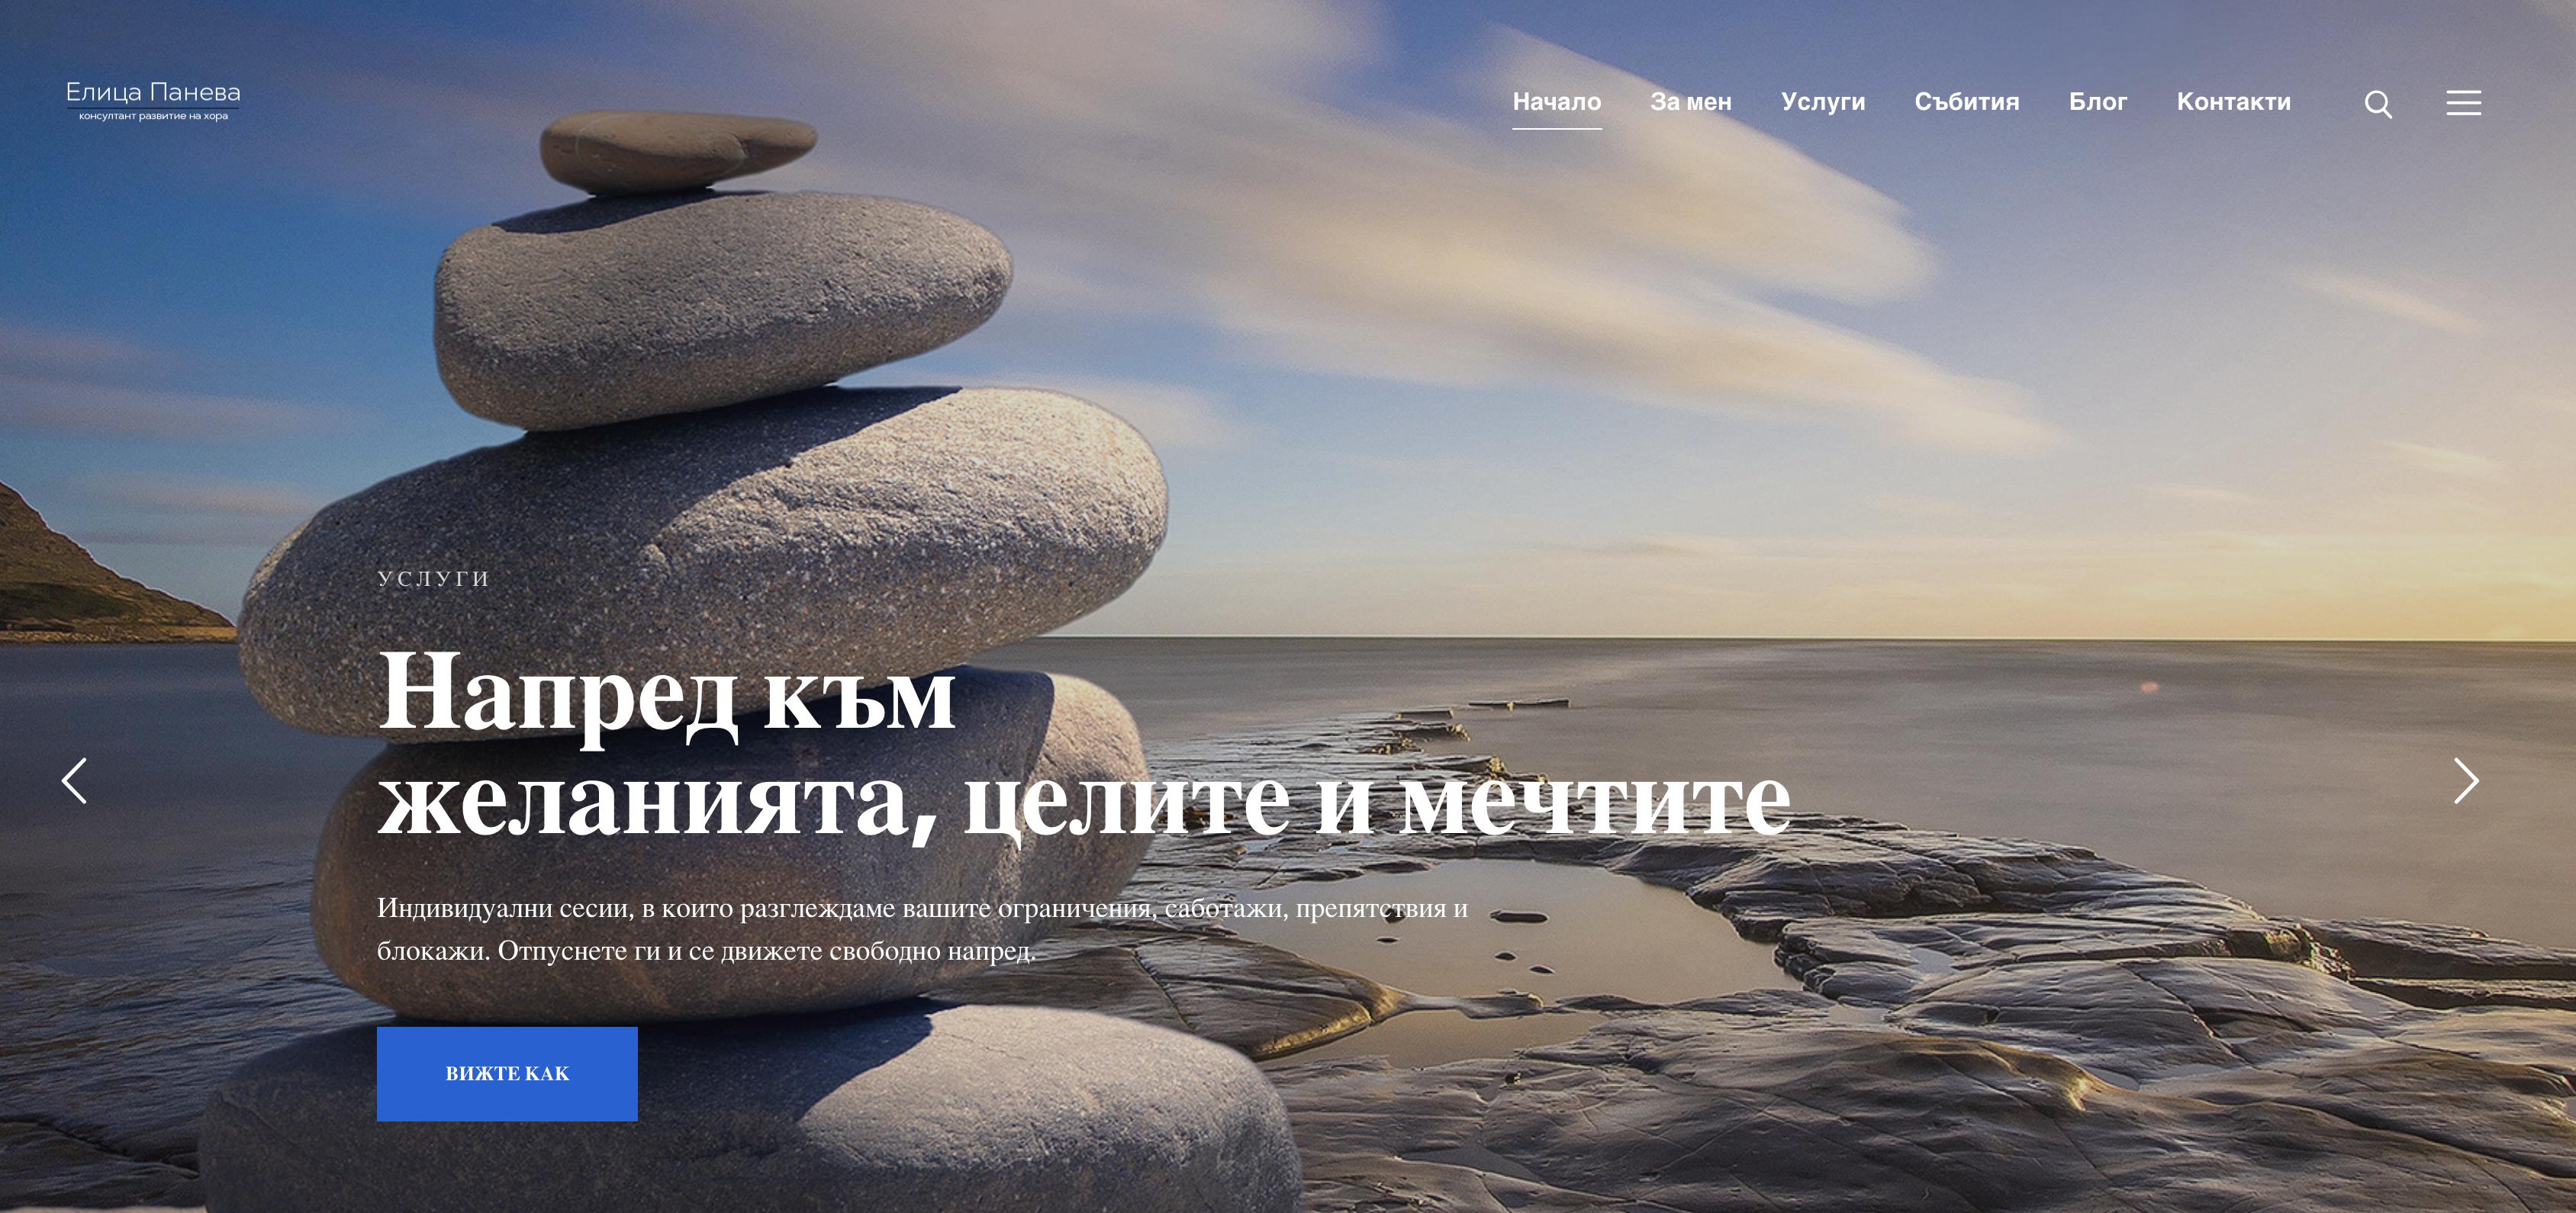 Personal website for Elica Paneva created by Entro Solutions